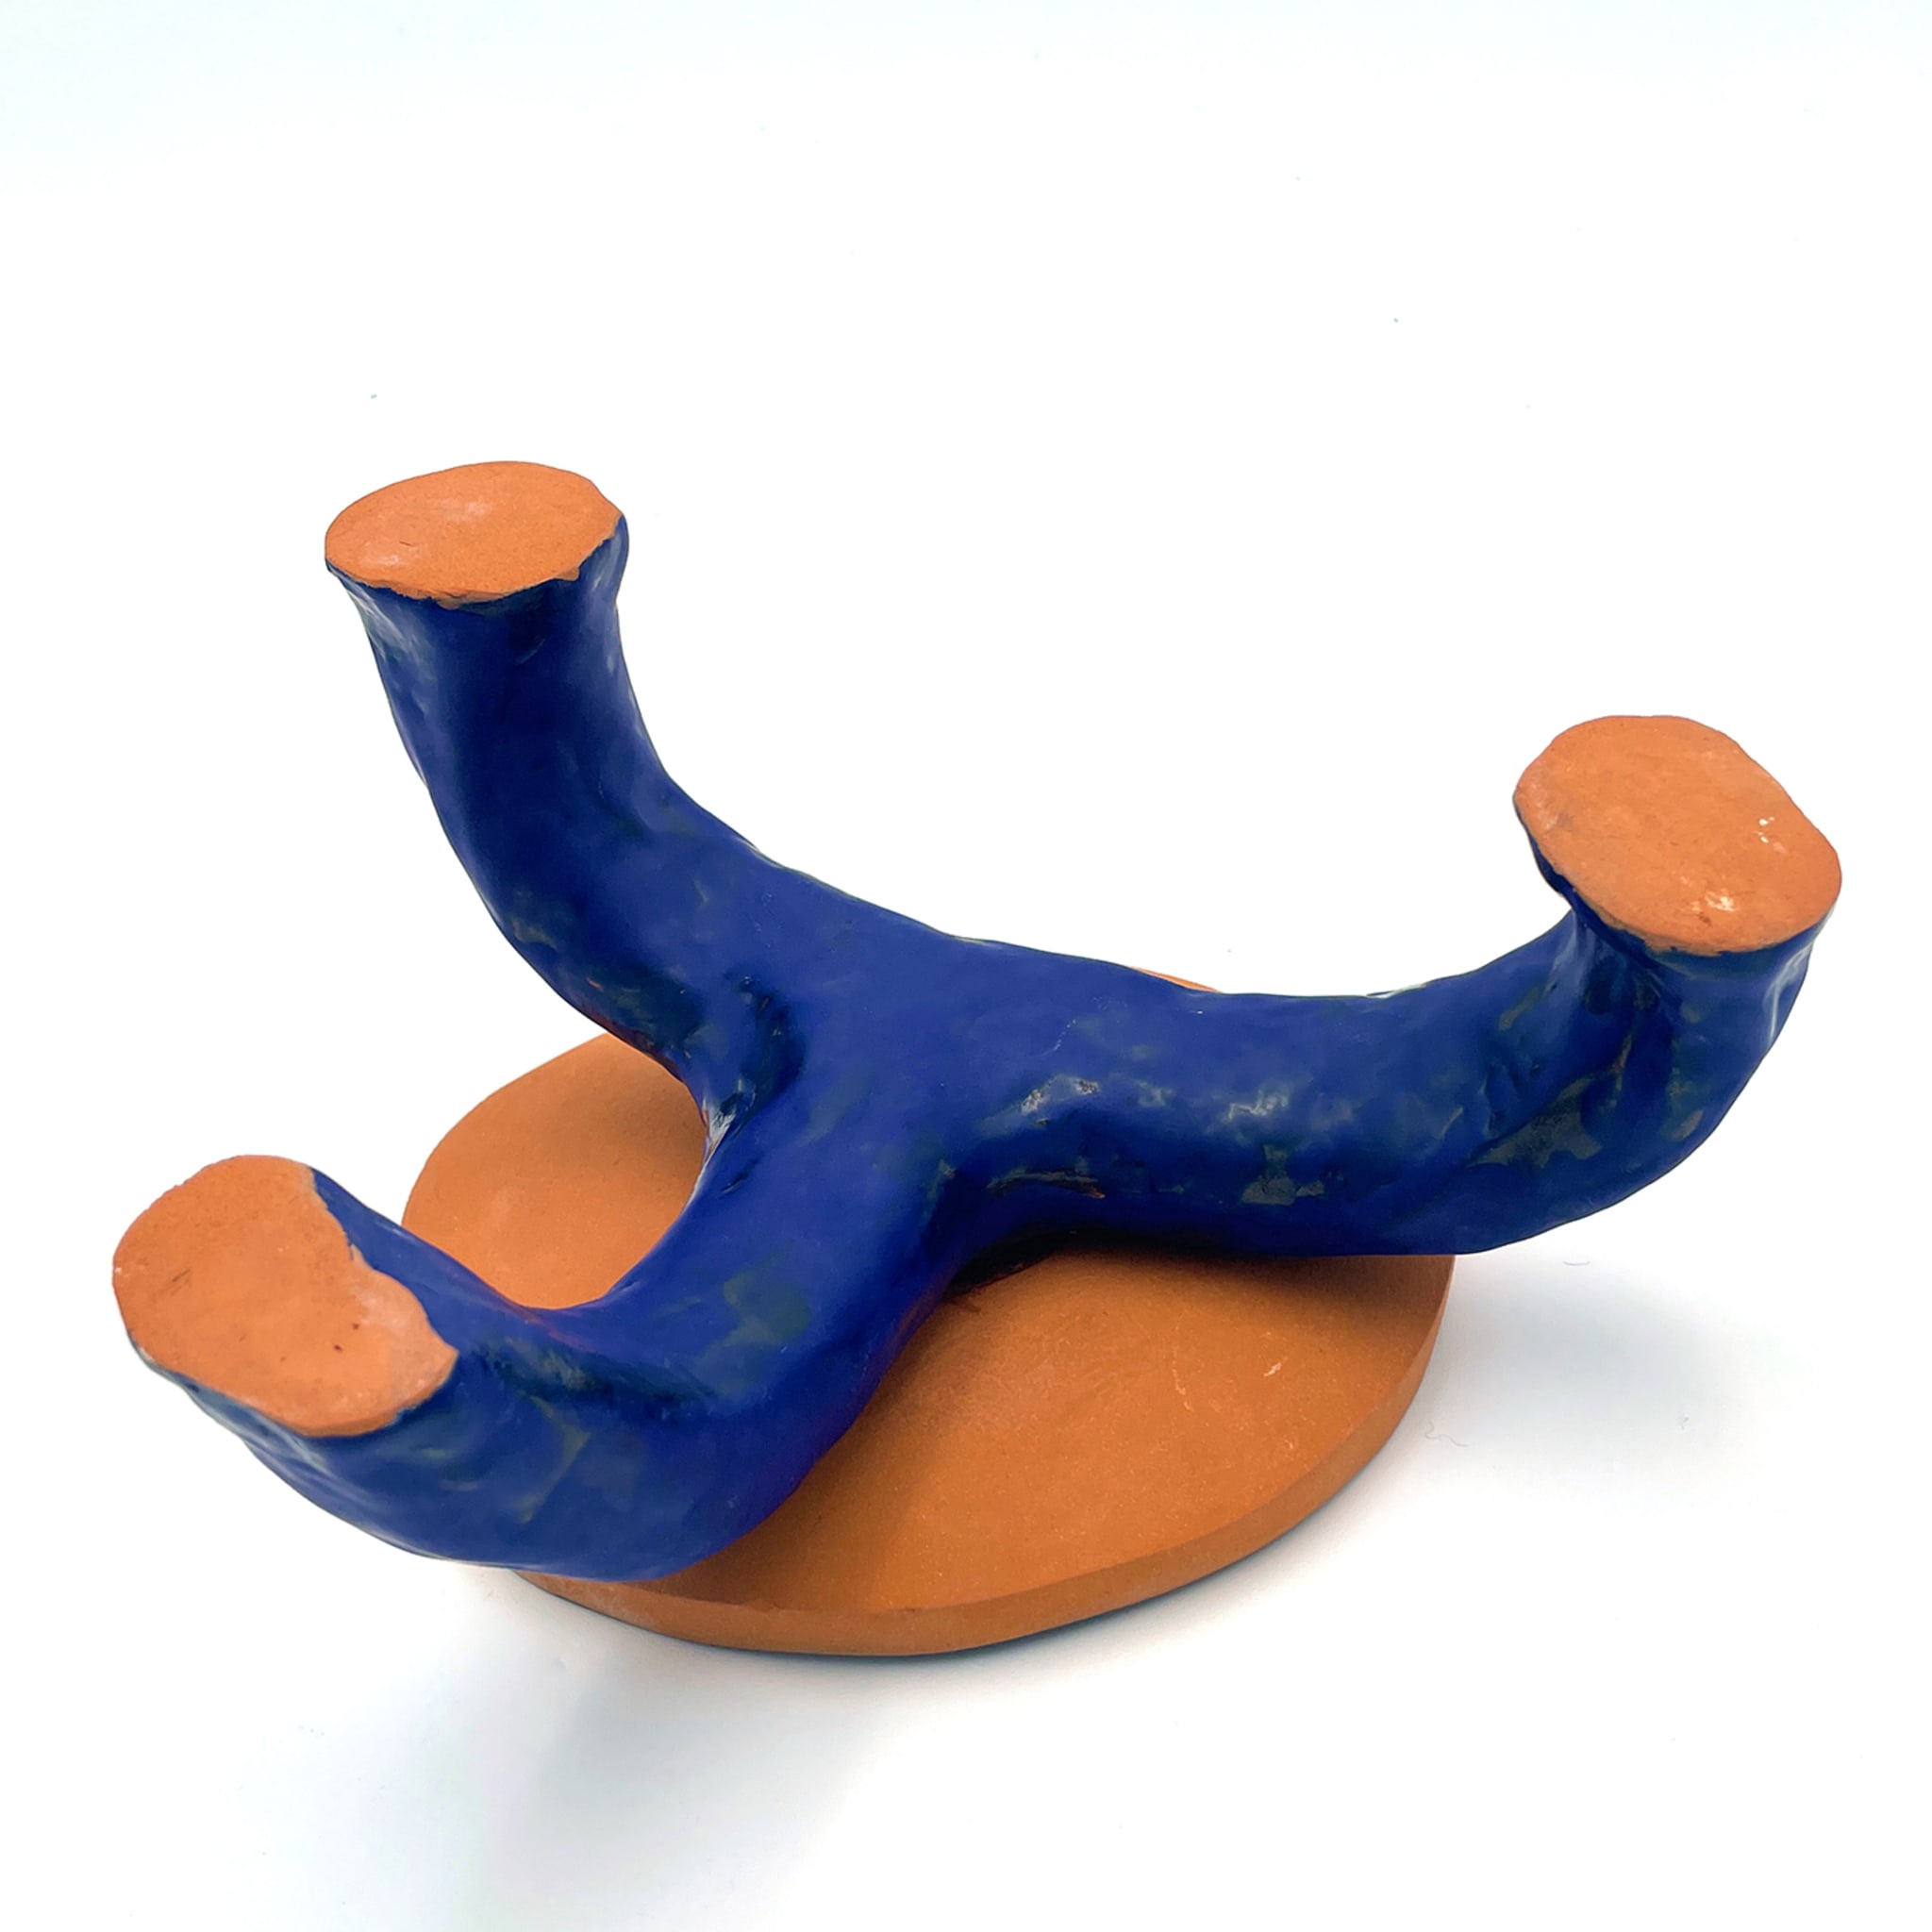 Fungo 3-legged Egyptian Blue and Matte Blue Cake Stand - Alternative view 2